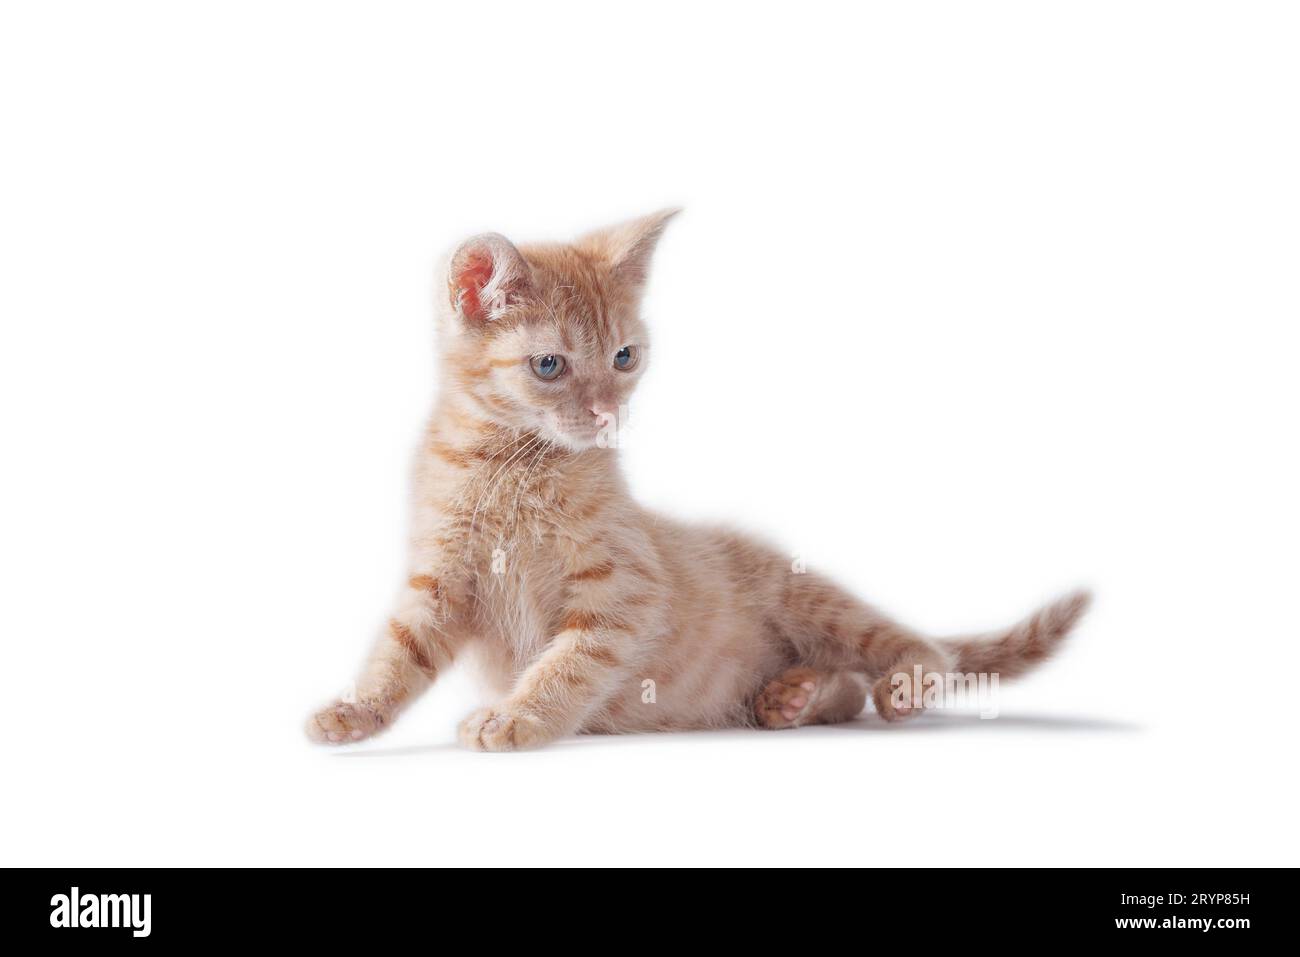 Bright red kitten standing and looking right on a white background Stock Photo